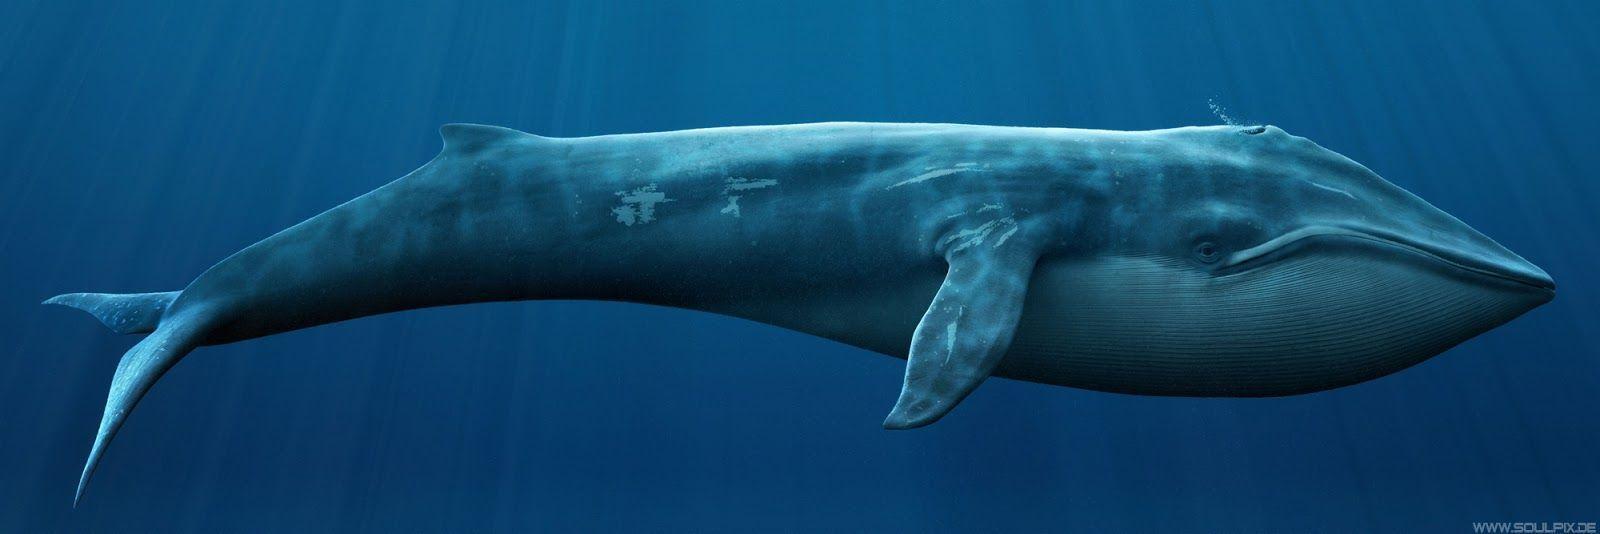 Blue Whale HD Wallpaper. journey to success